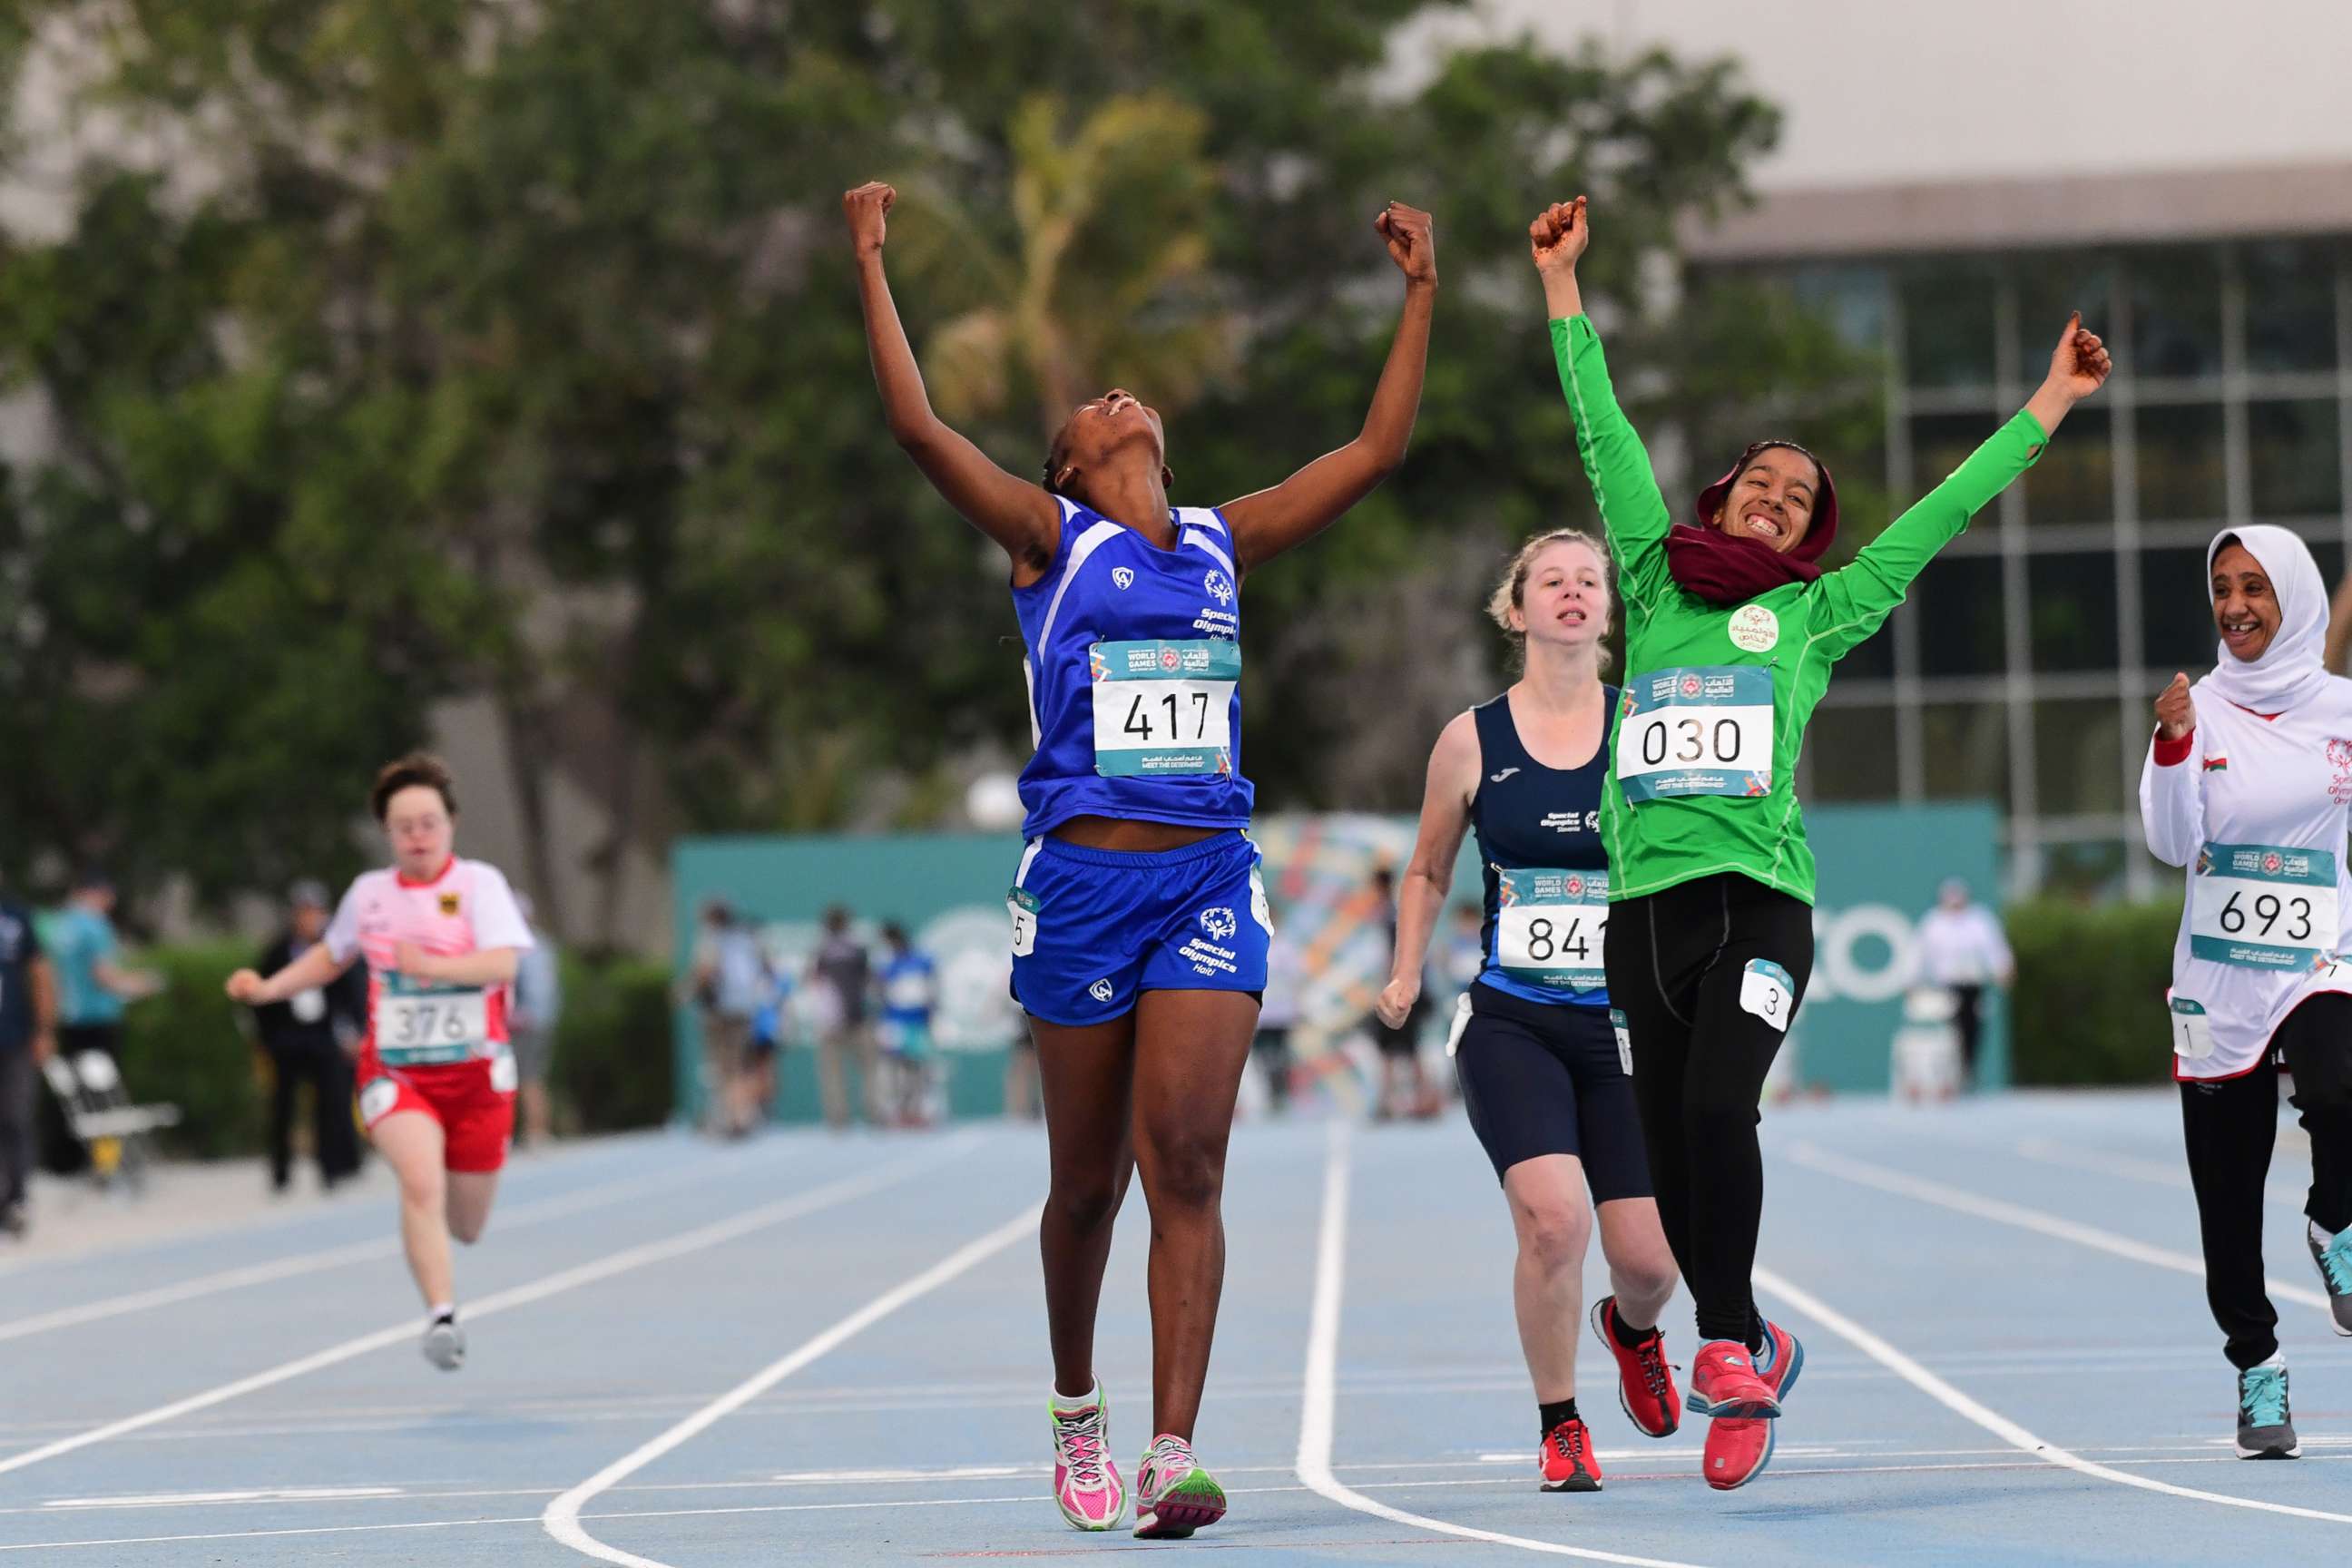 PHOTO: Widjmy Charles of Haiti and Dalila Semichi of Algeria competing in track and field during the 2019 Special Olympics World Games, March 18, 2019, in Abu Dhabi, UAE.